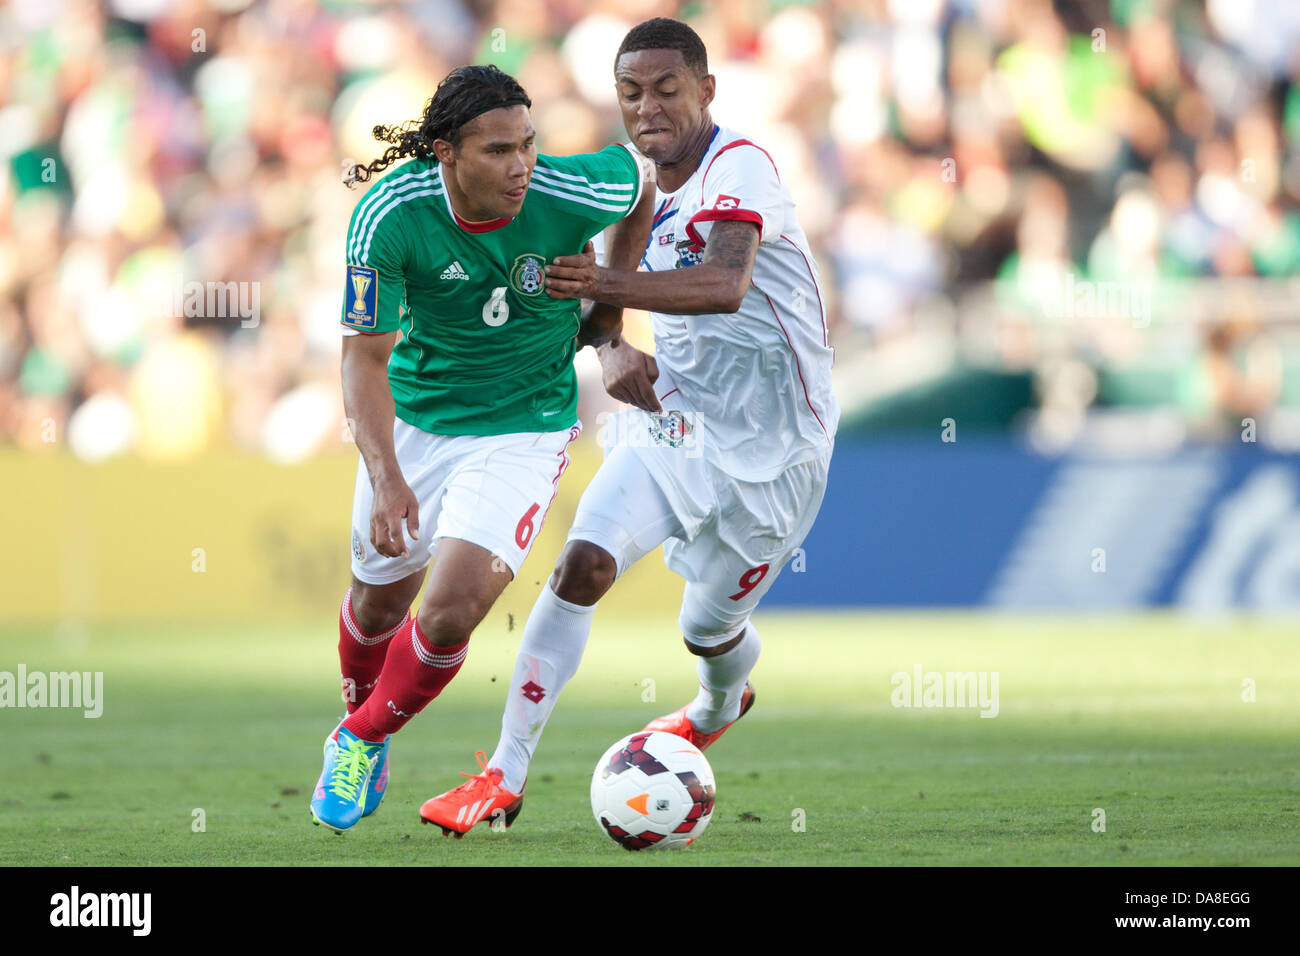 Pasadena, California, USA. 7th July, 2013. Carlos Pena #6 of Mexico and Gabriel Torres #9 of Panama during the 2013 CONCACAF Gold Cup game between Mexico and Panama on July 7, 2013 at the Rose Bowl in Pasadena, Ca. Credit:  Brandon Parry / Newsport/Alamy Live News Stock Photo